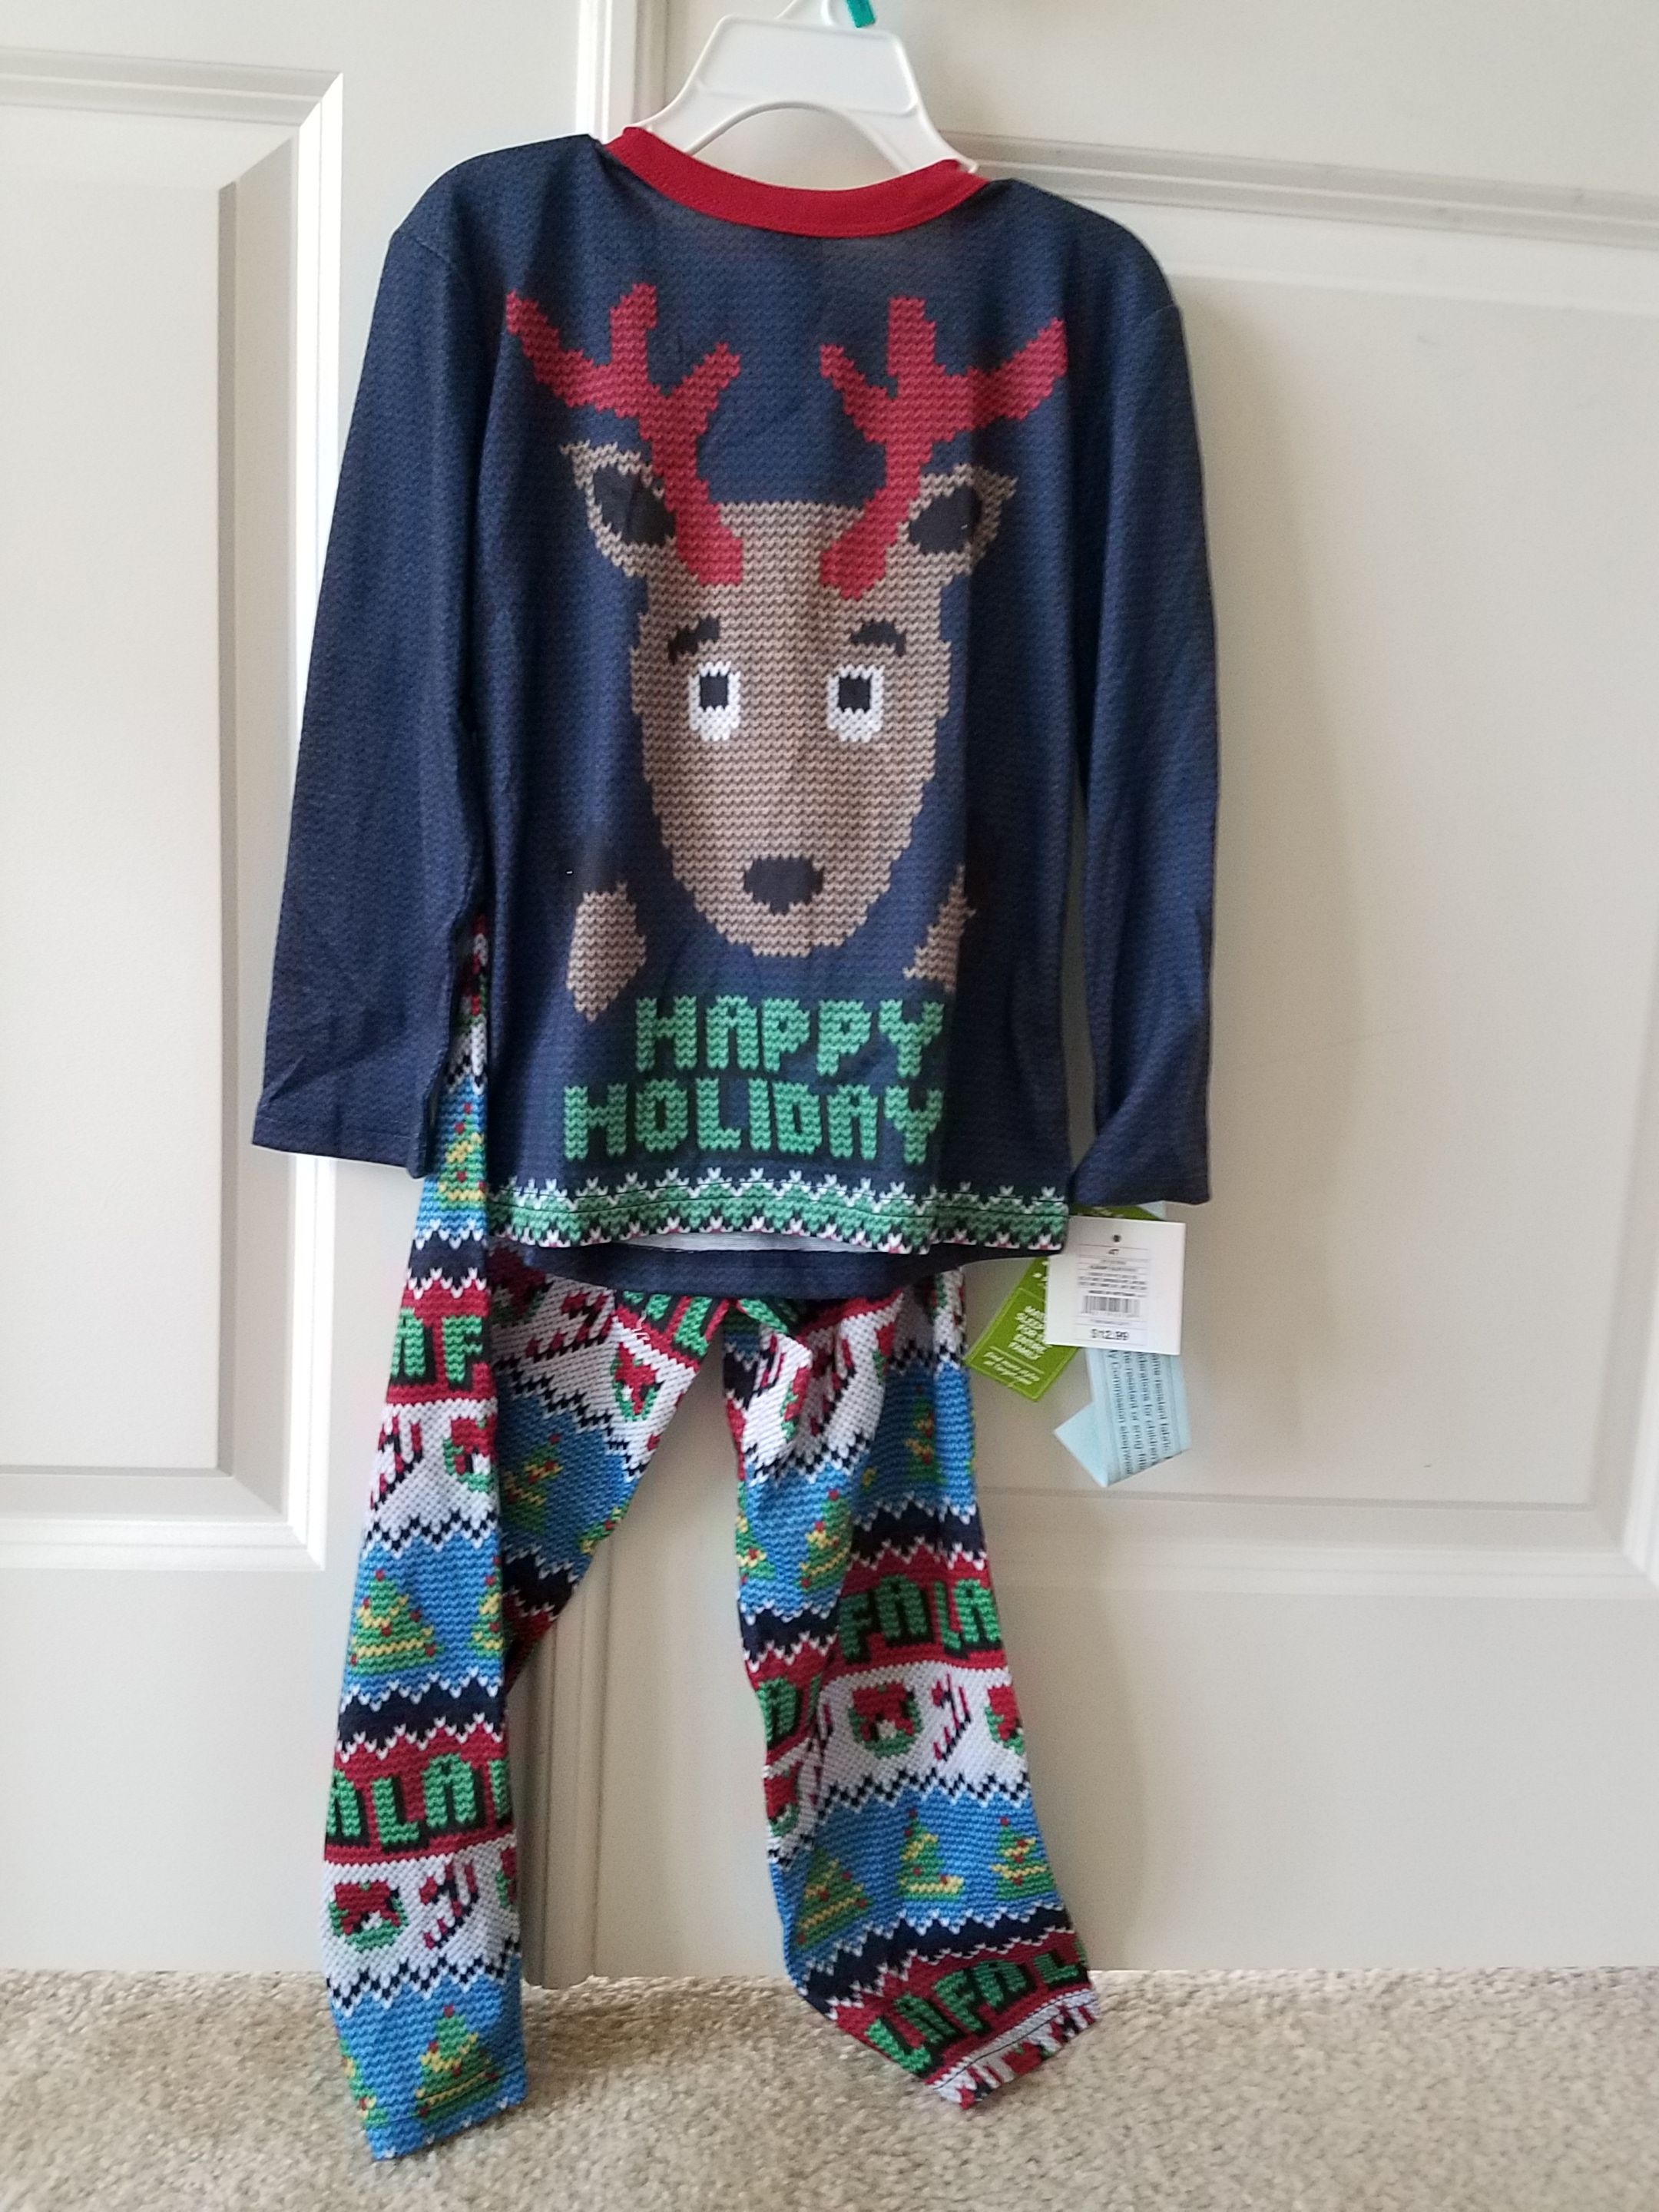 Kids clothes New with tags holiday pajamas size 4T - $10 price firm